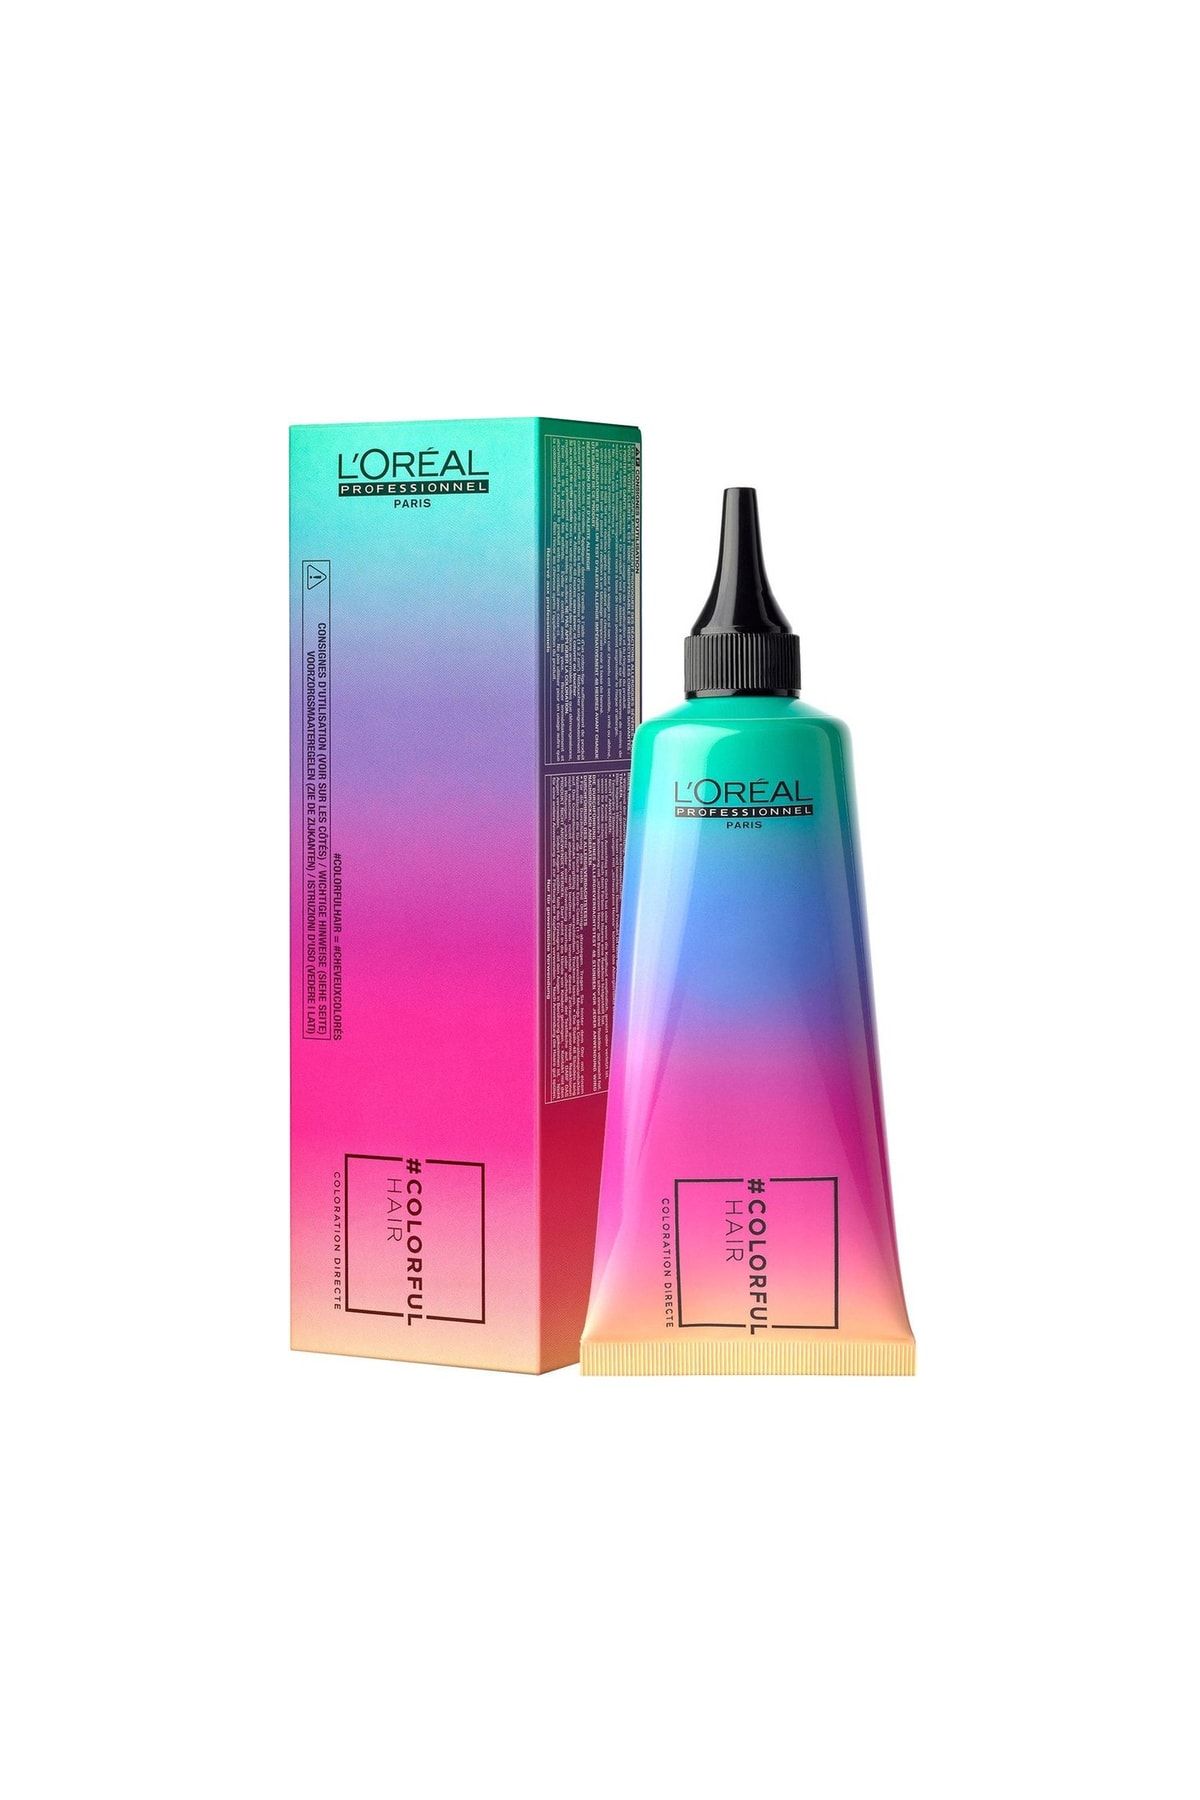 L'oreal Professionnel Colorful Hair Crystal Clear Transparent Bright Perfect Semi Permament Hair Color Cream 90ml